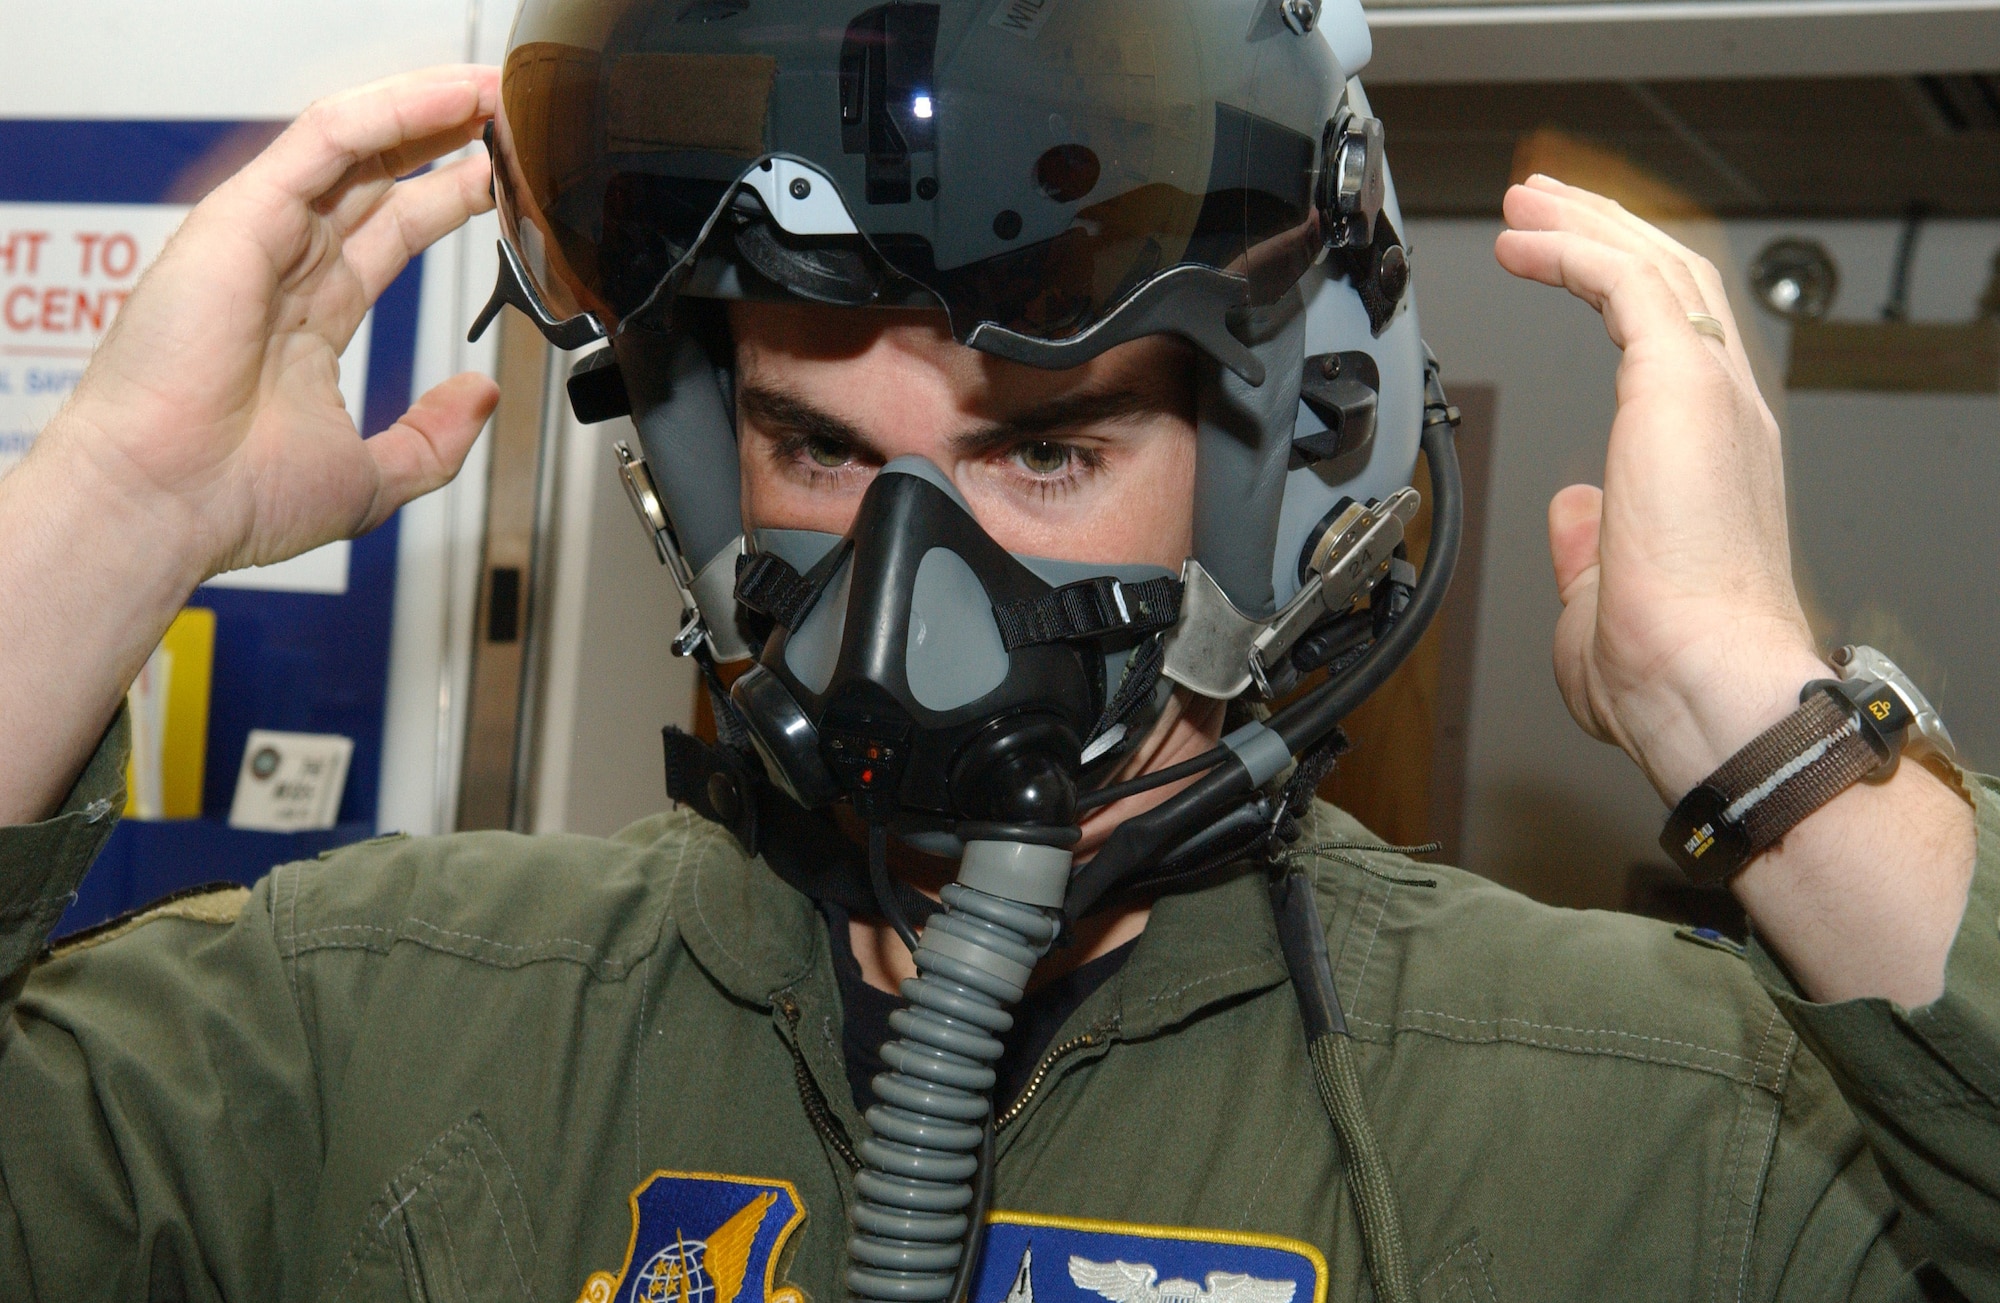 Capt. Jeremey Wimer tries on a newly issued fighter helmet while gearing up Feb. 21 at the 18th Fighter Squadron at Eielson Air Force Base, Alaska. The new helmet mounted queing system has targeting technology that projects holographic data on the inside right of the visor in the form of a container, or que and allows pilots to continually survey and distinguish between friendly and enemy air and ground targets. Captain Wimer is an F-16 Fighting Falcon pilot. (U.S. Air Force photo/Airman 1st Class Christopher Griffin)